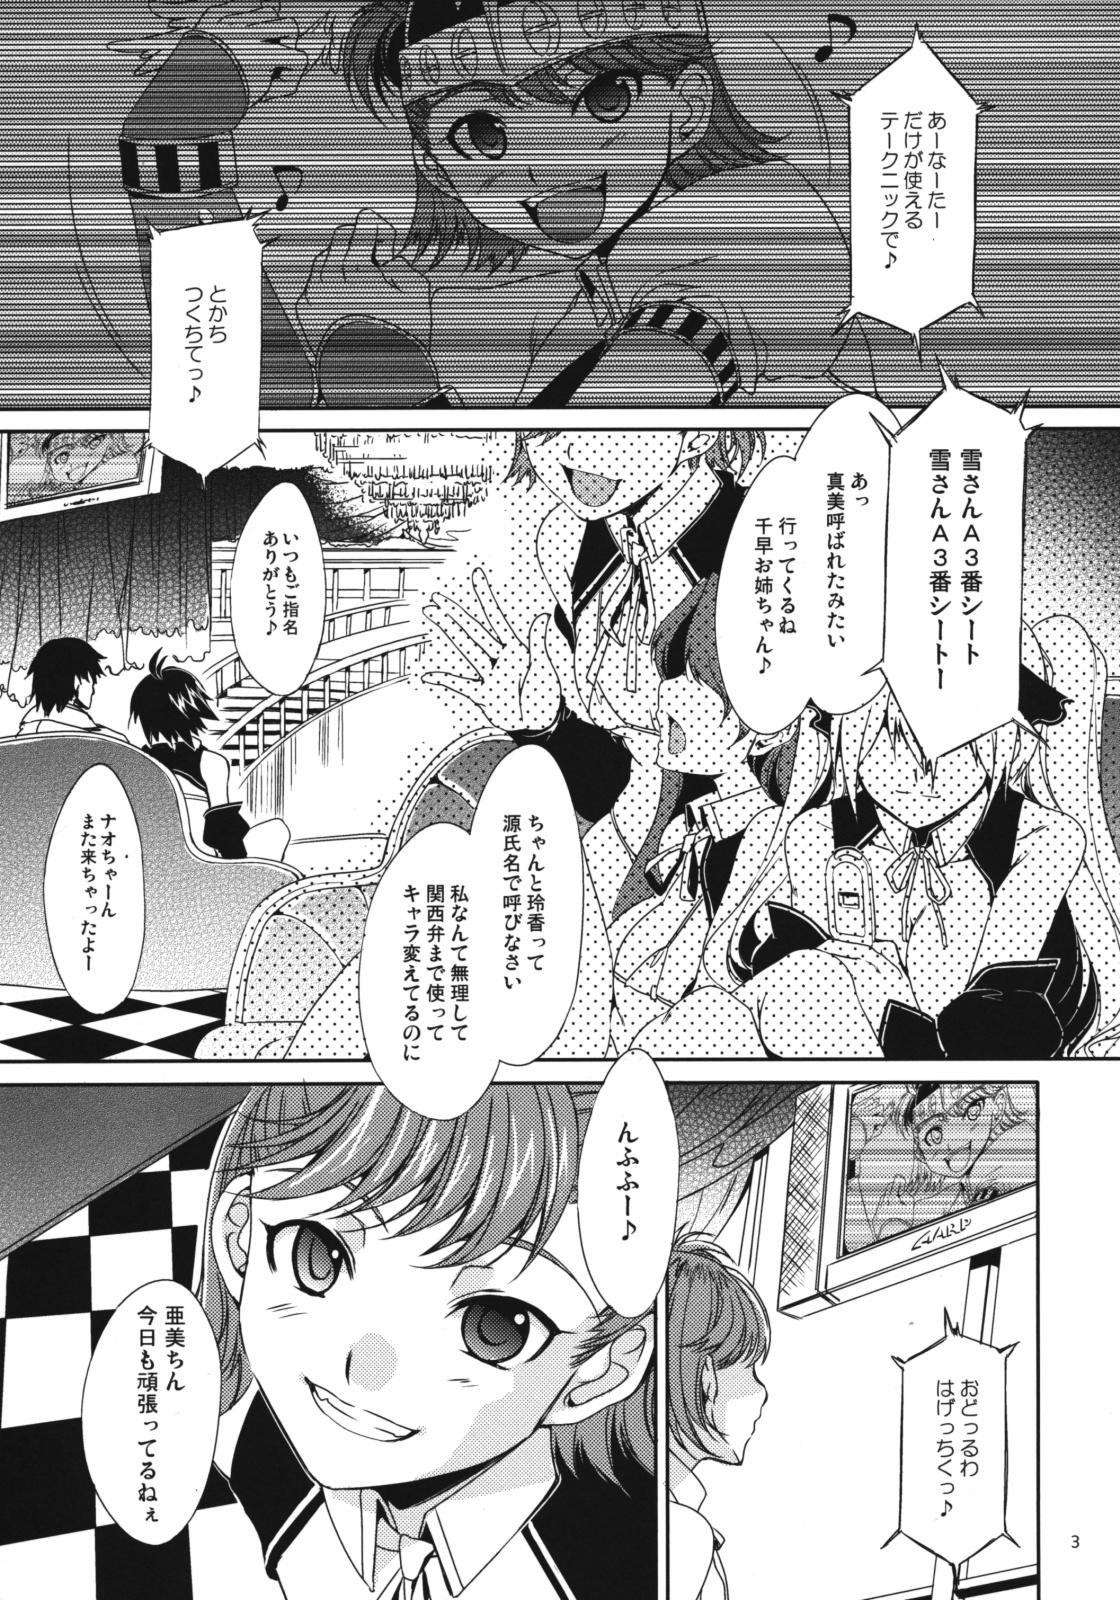 Tied The AnimalM@ster Vol.4 - The idolmaster Orgy - Page 4